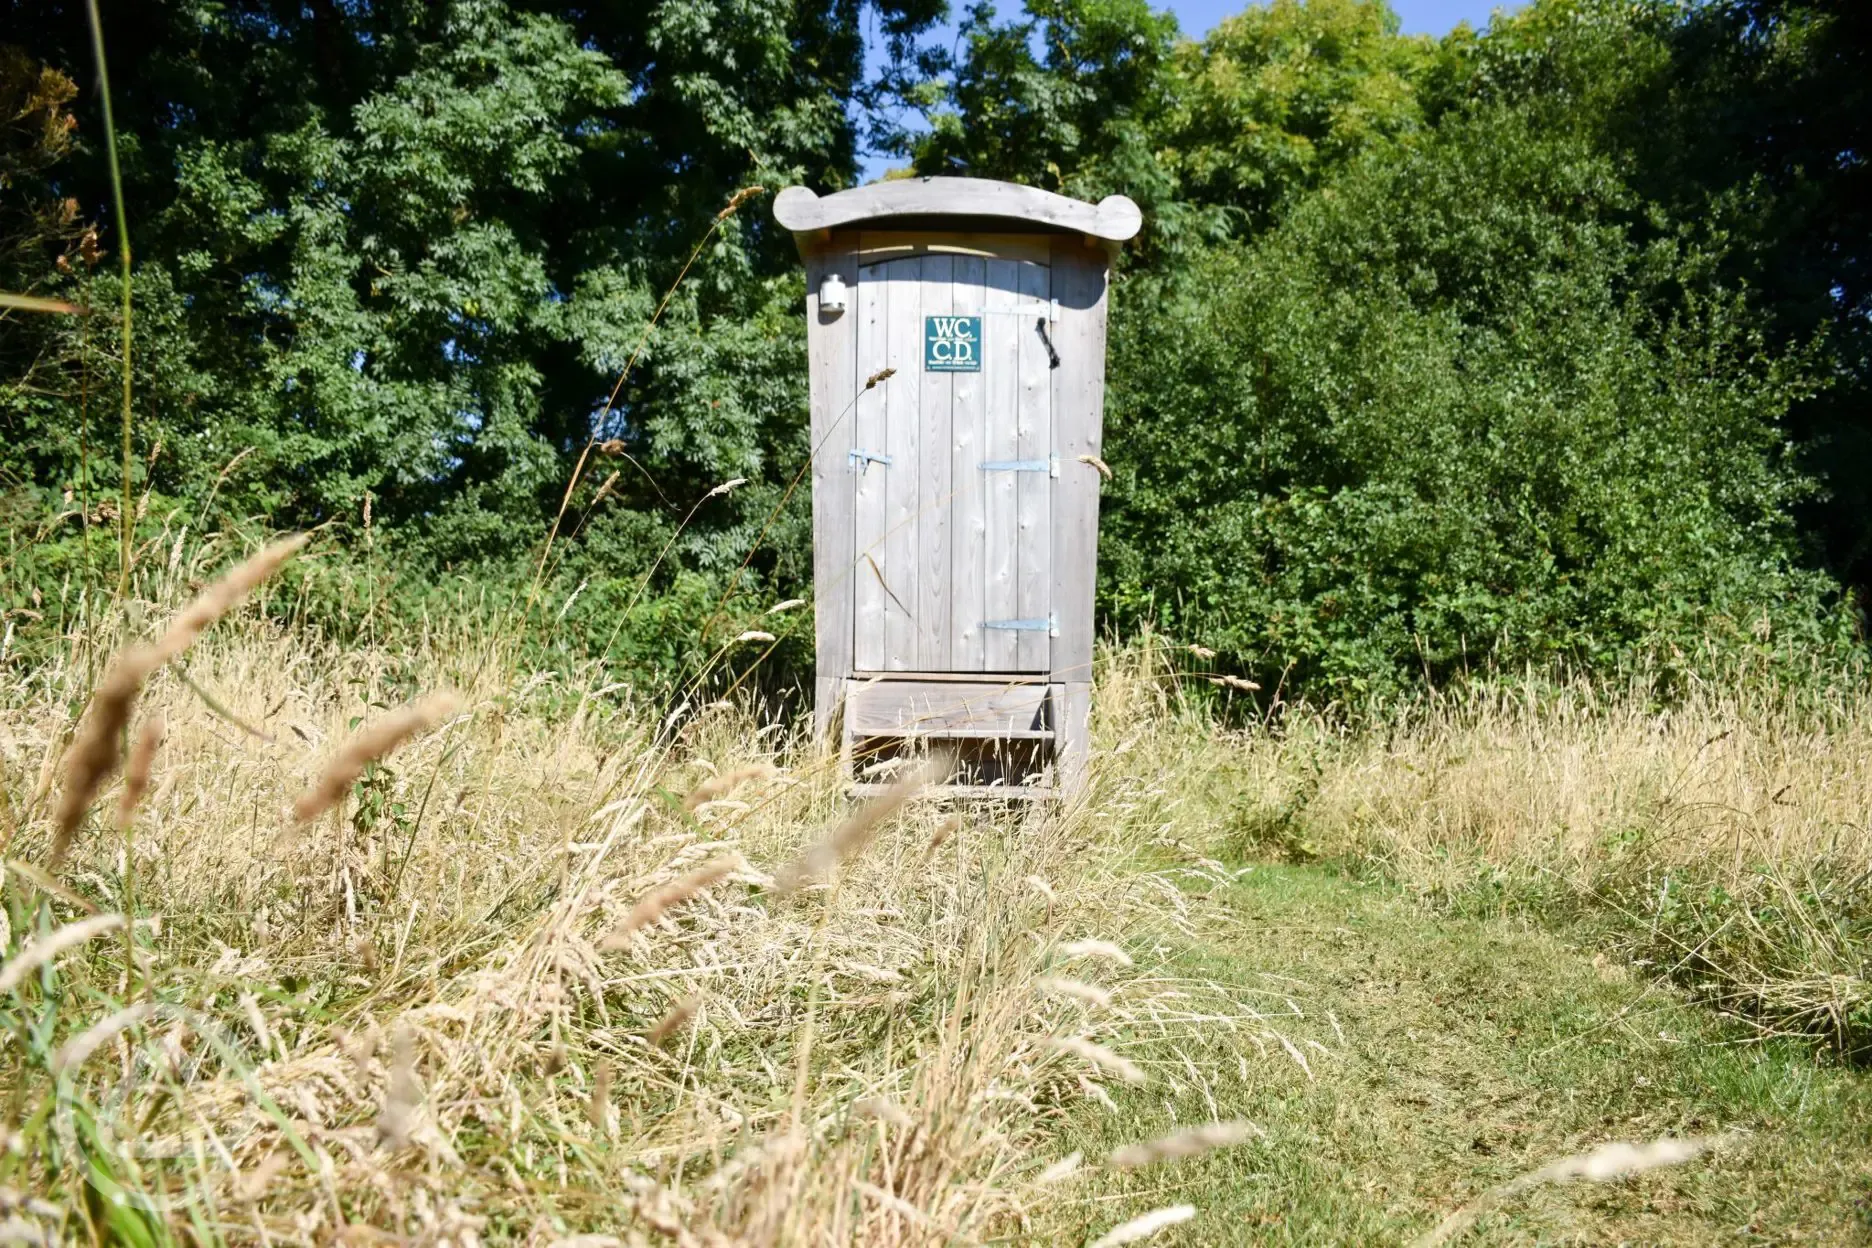 The facilities at Stackpole Under the Stars